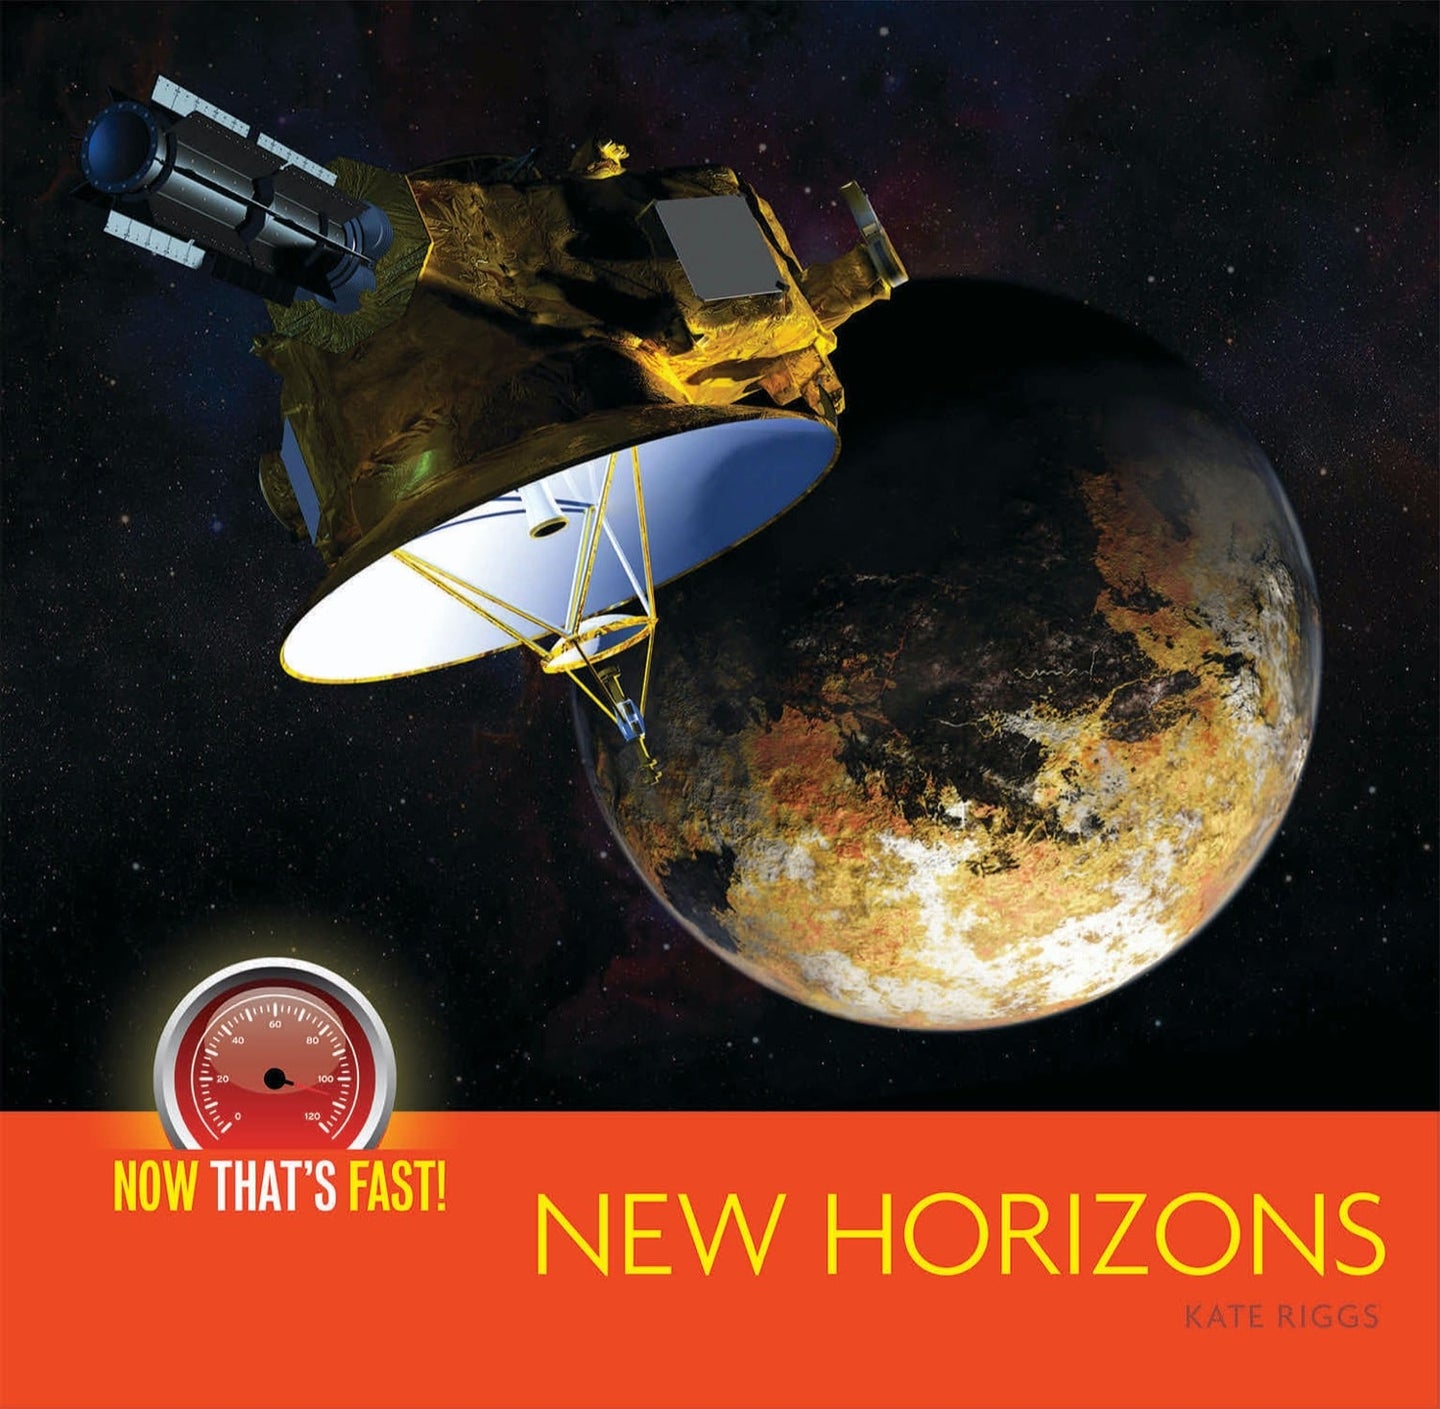 Now That's Fast!: New Horizons